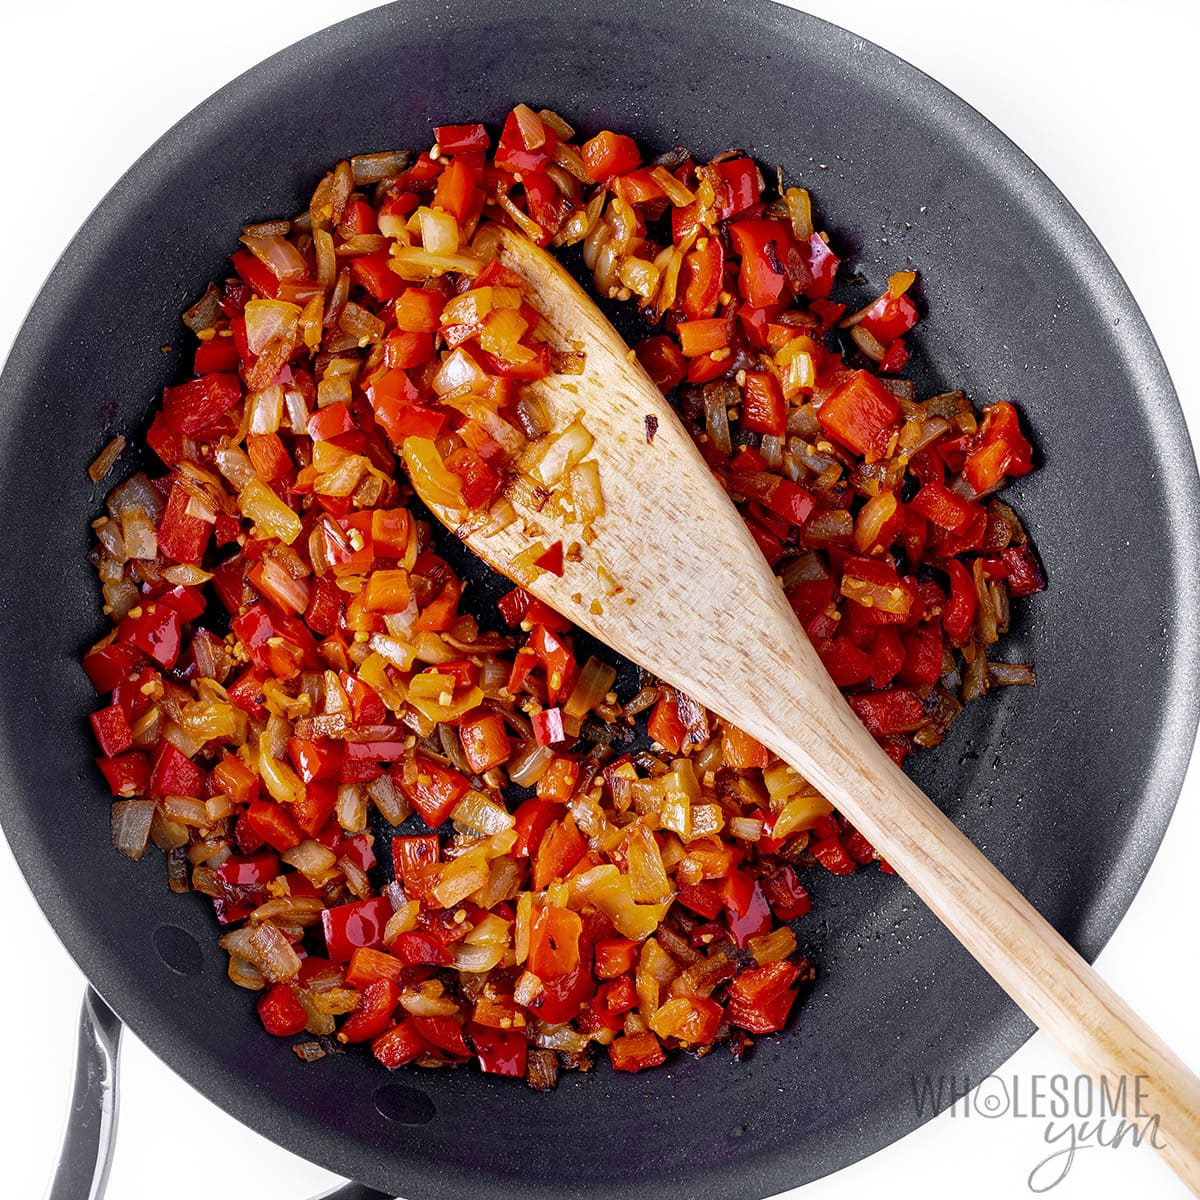 Vegetables sauteed in a skillet.